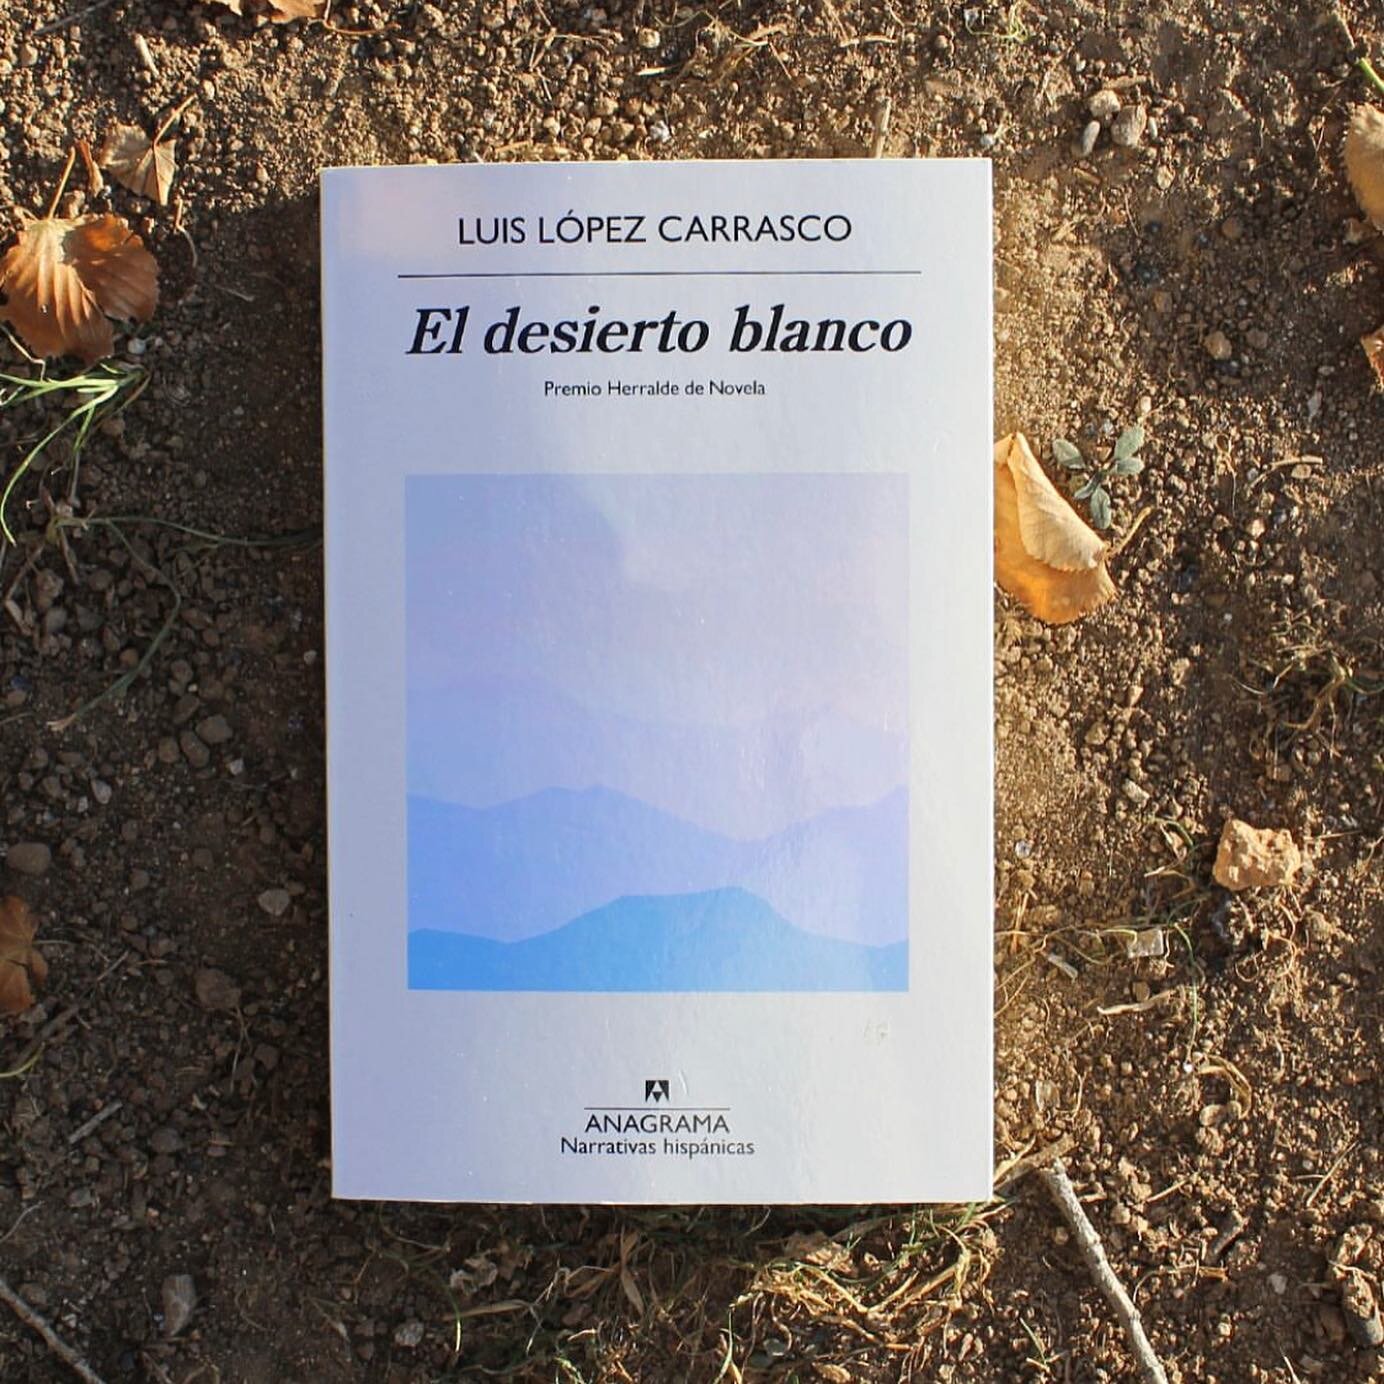 EL DESIERTO BLANCO [THE WHITE DESERT] by Luis L&oacute;pez Carrasco, winner of the 2023 Herralde Novel Prize, was published with @anagramaeditor last year. Rights have sold to @grantabooks (World English) and The Writers&rsquo; Publishing House (Chin